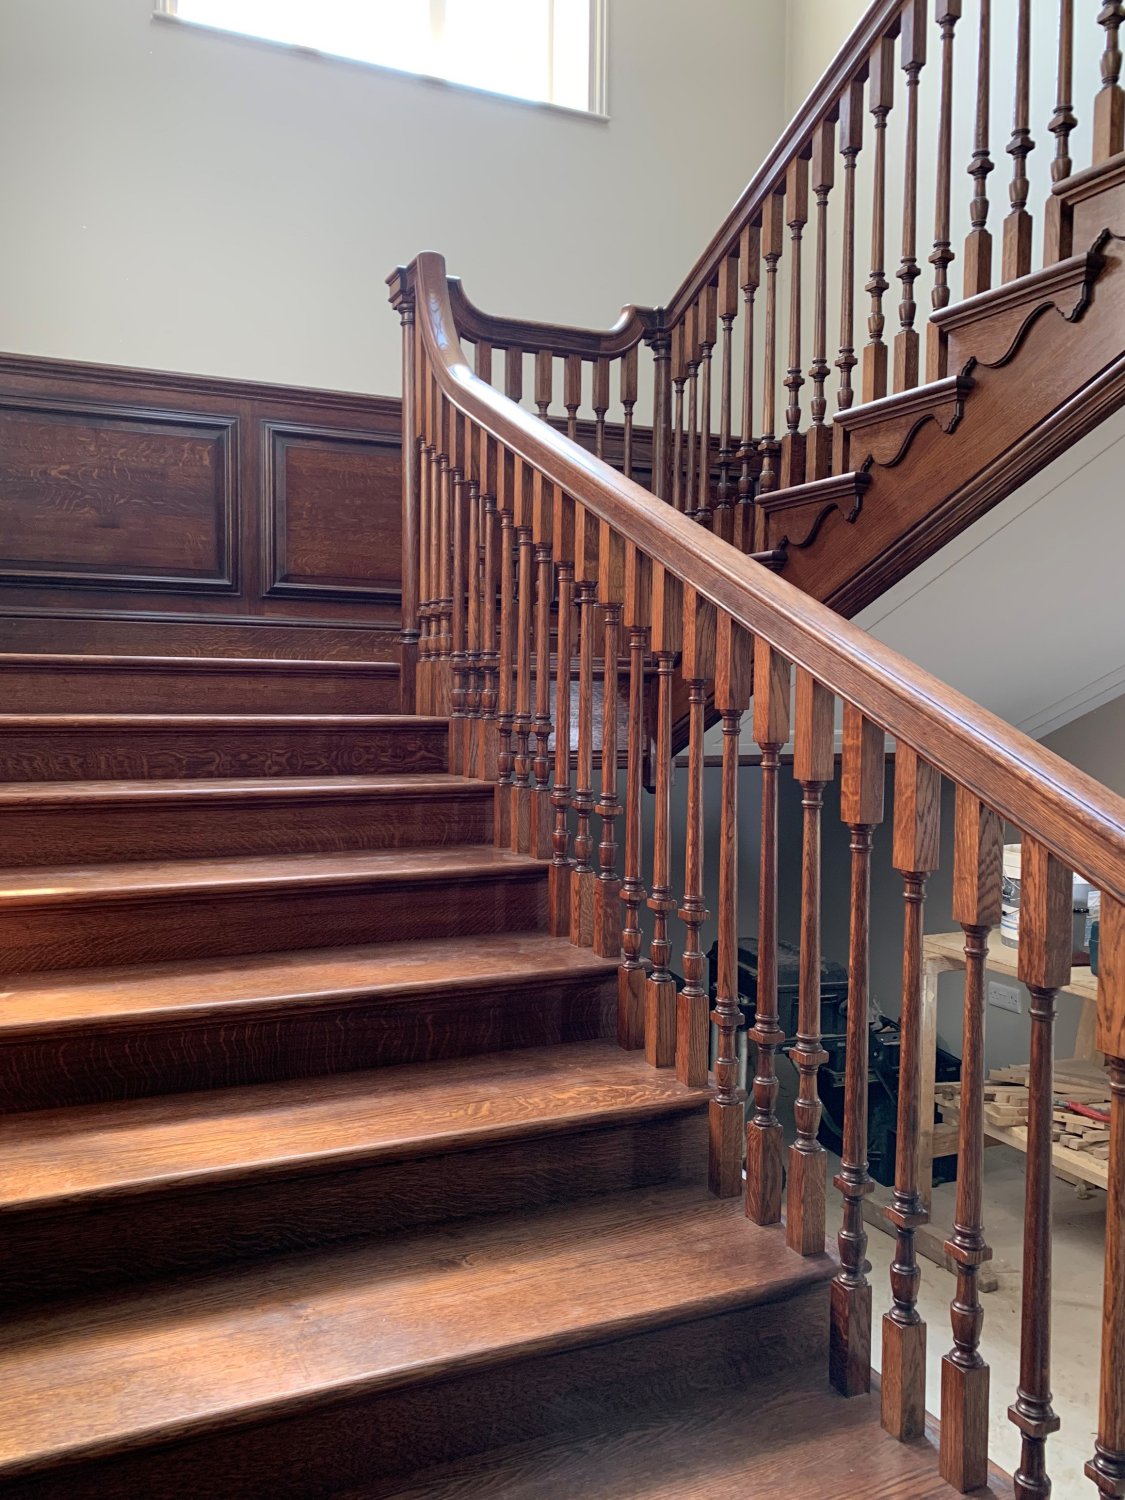 The gentle rise of the solid oak staircase